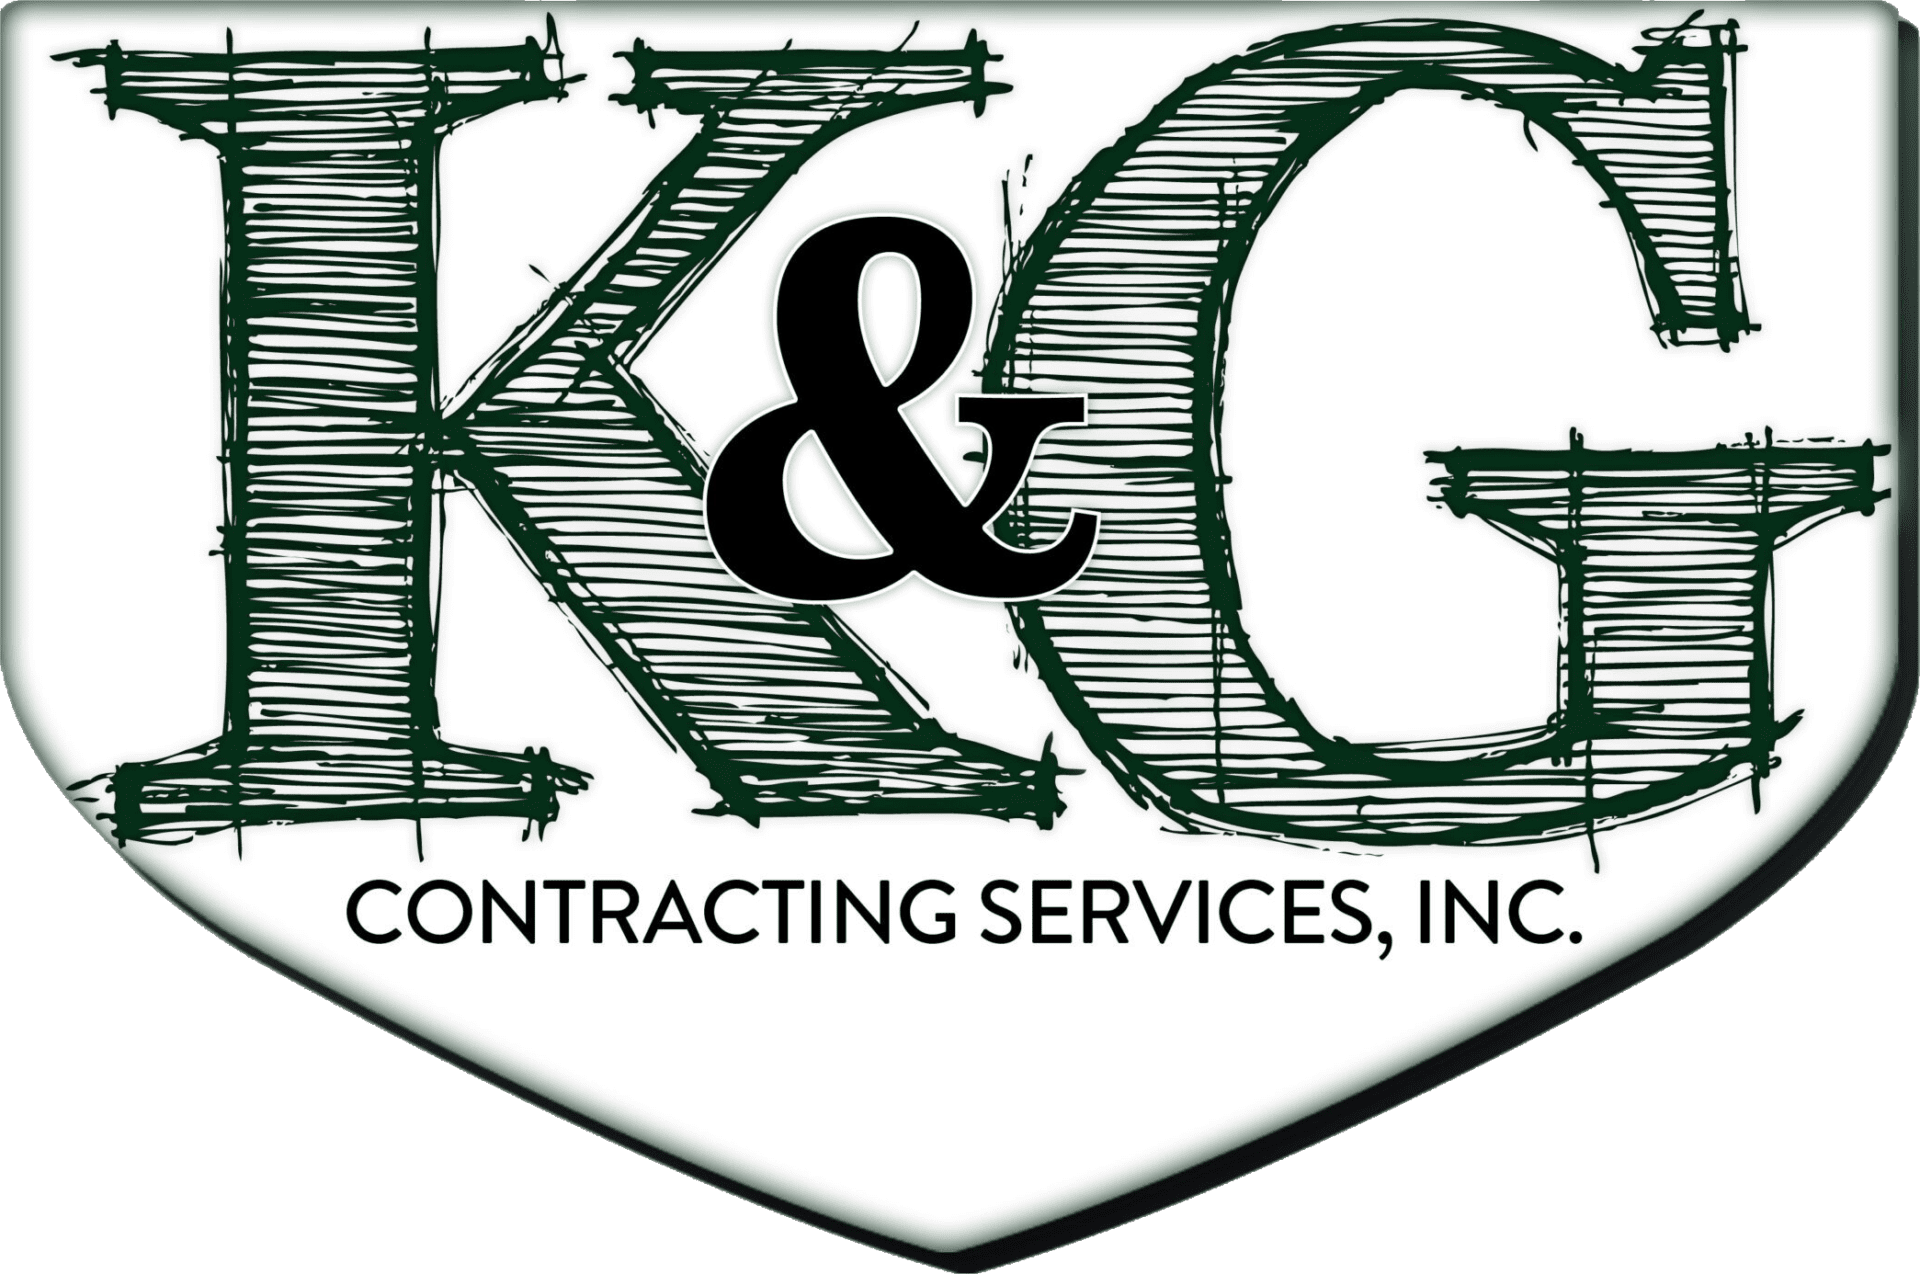 K & G Contracting Services